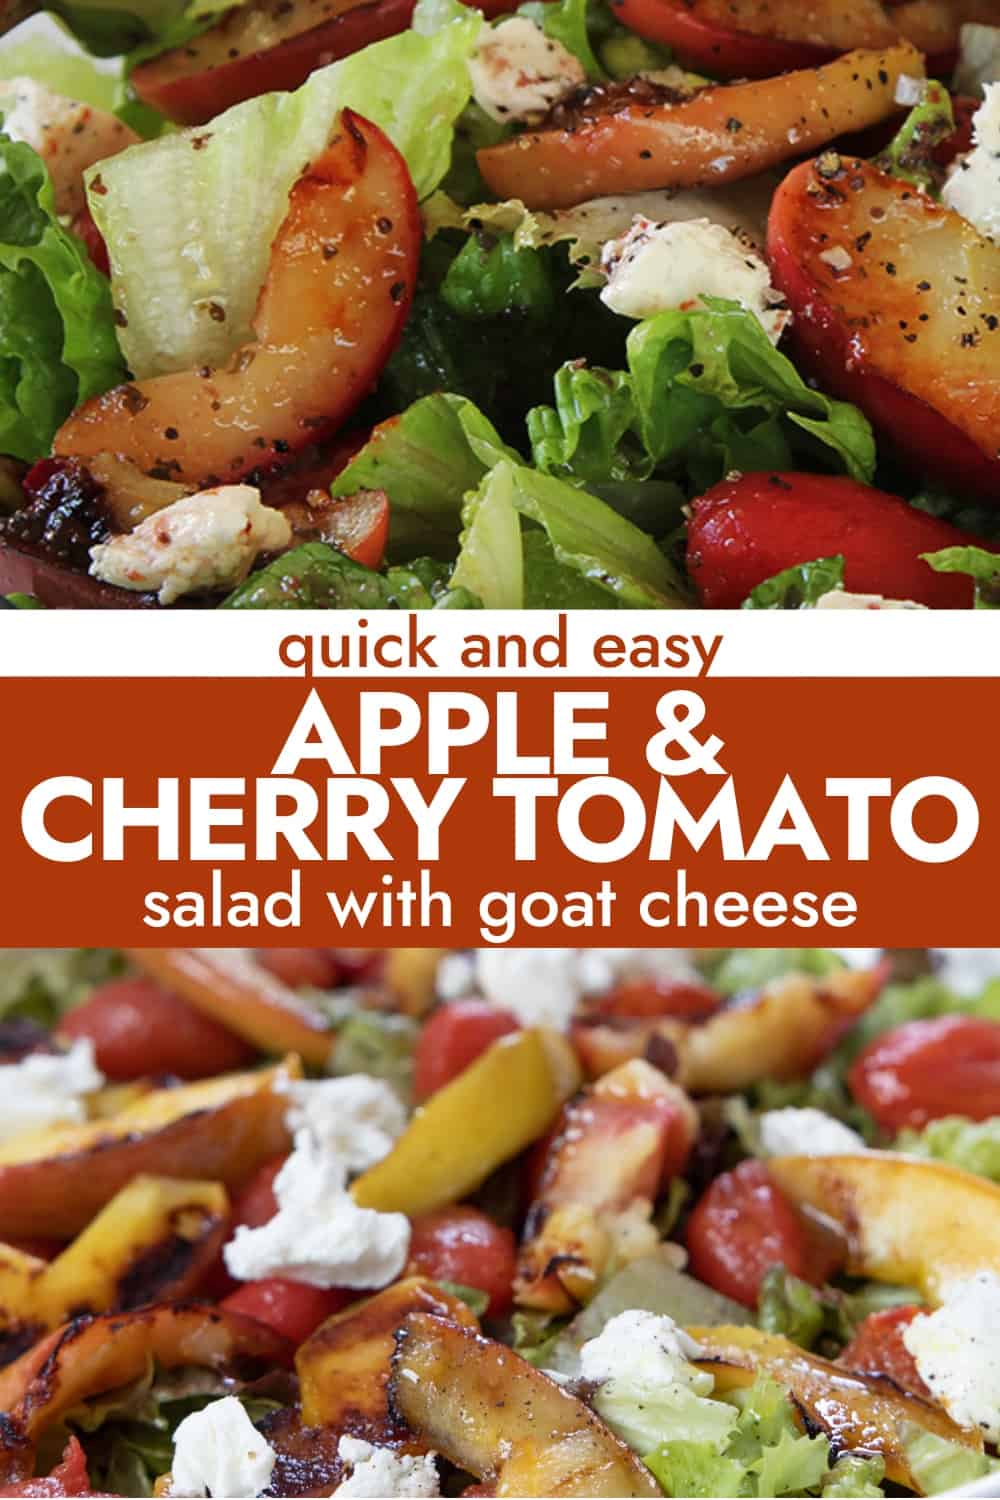 Goat Cheese Salad with Apples & Cherry Tomatoes